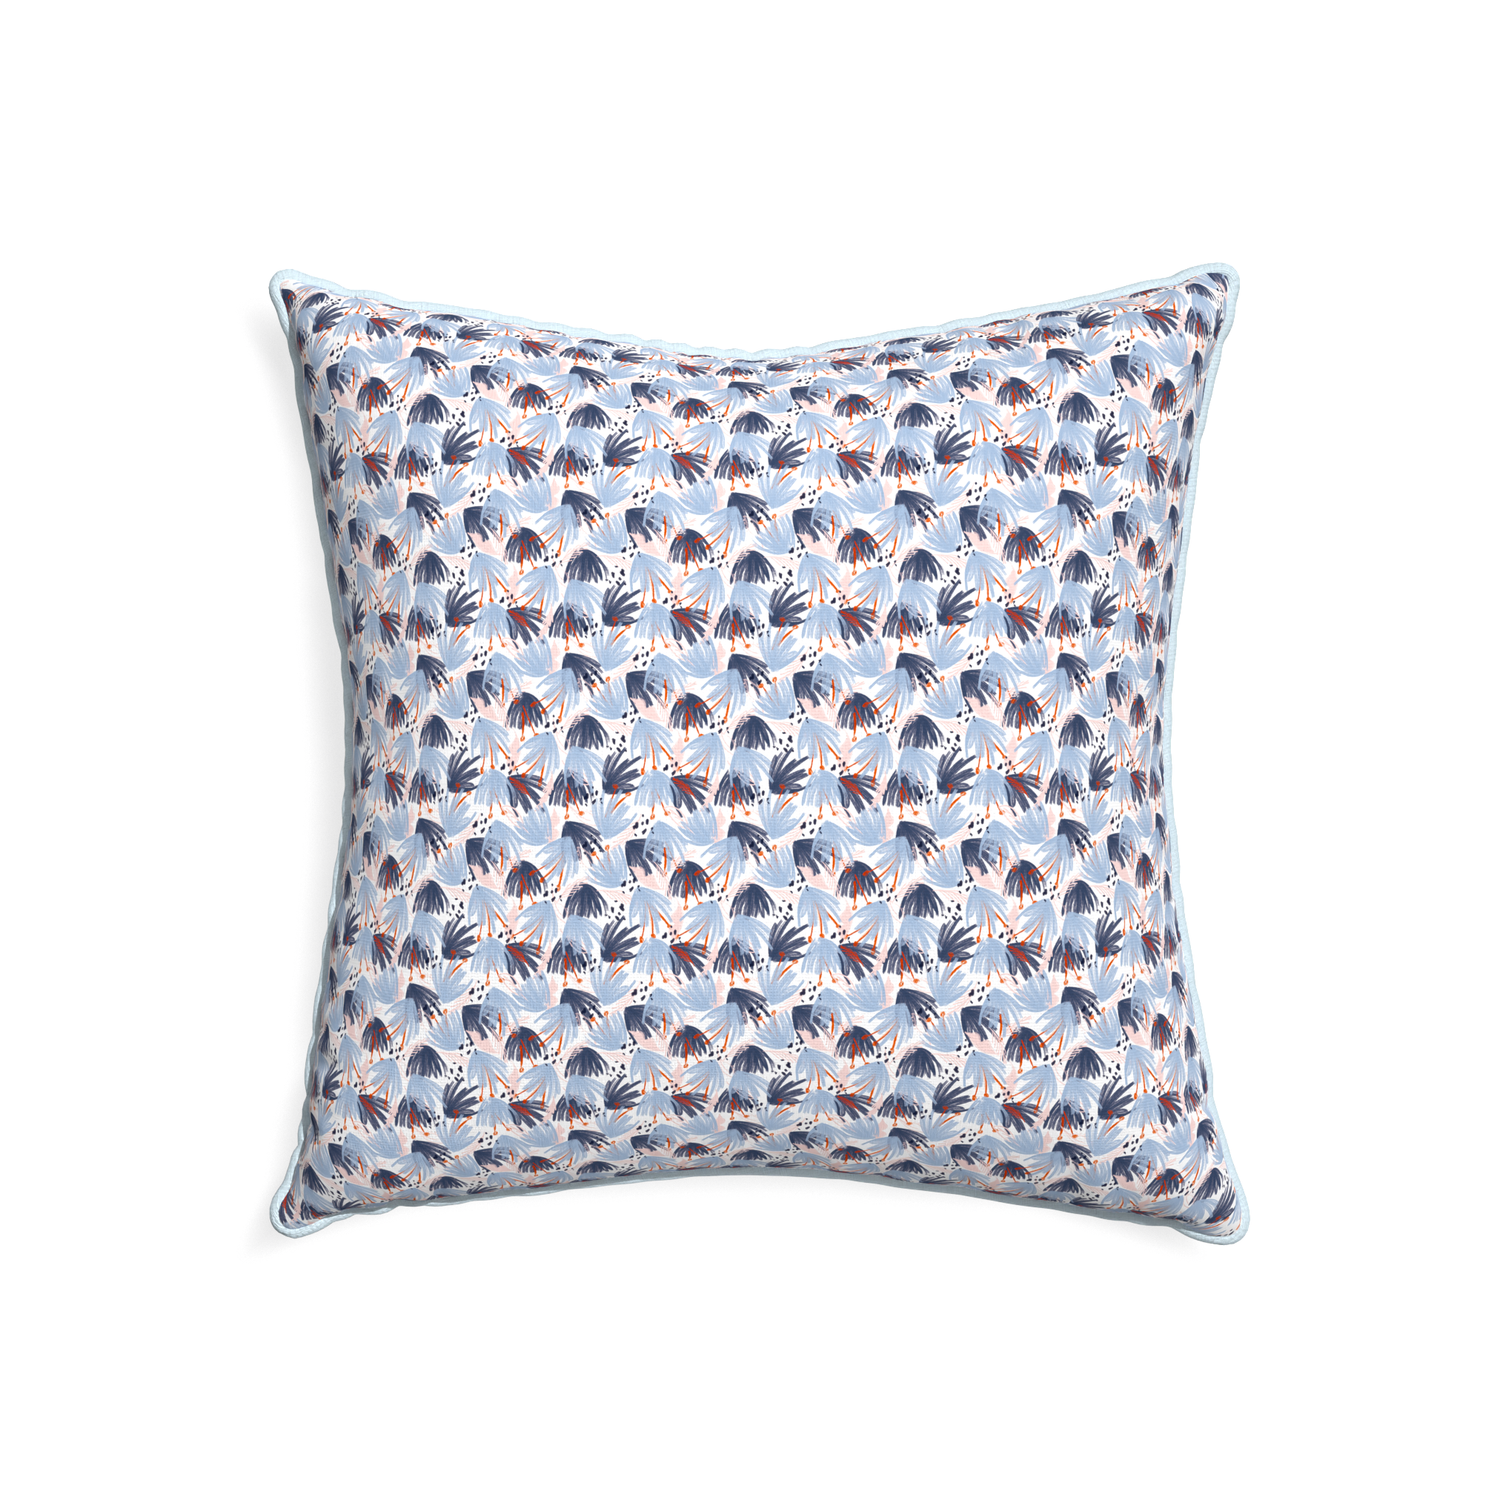 22-square eden blue custom pillow with powder piping on white background